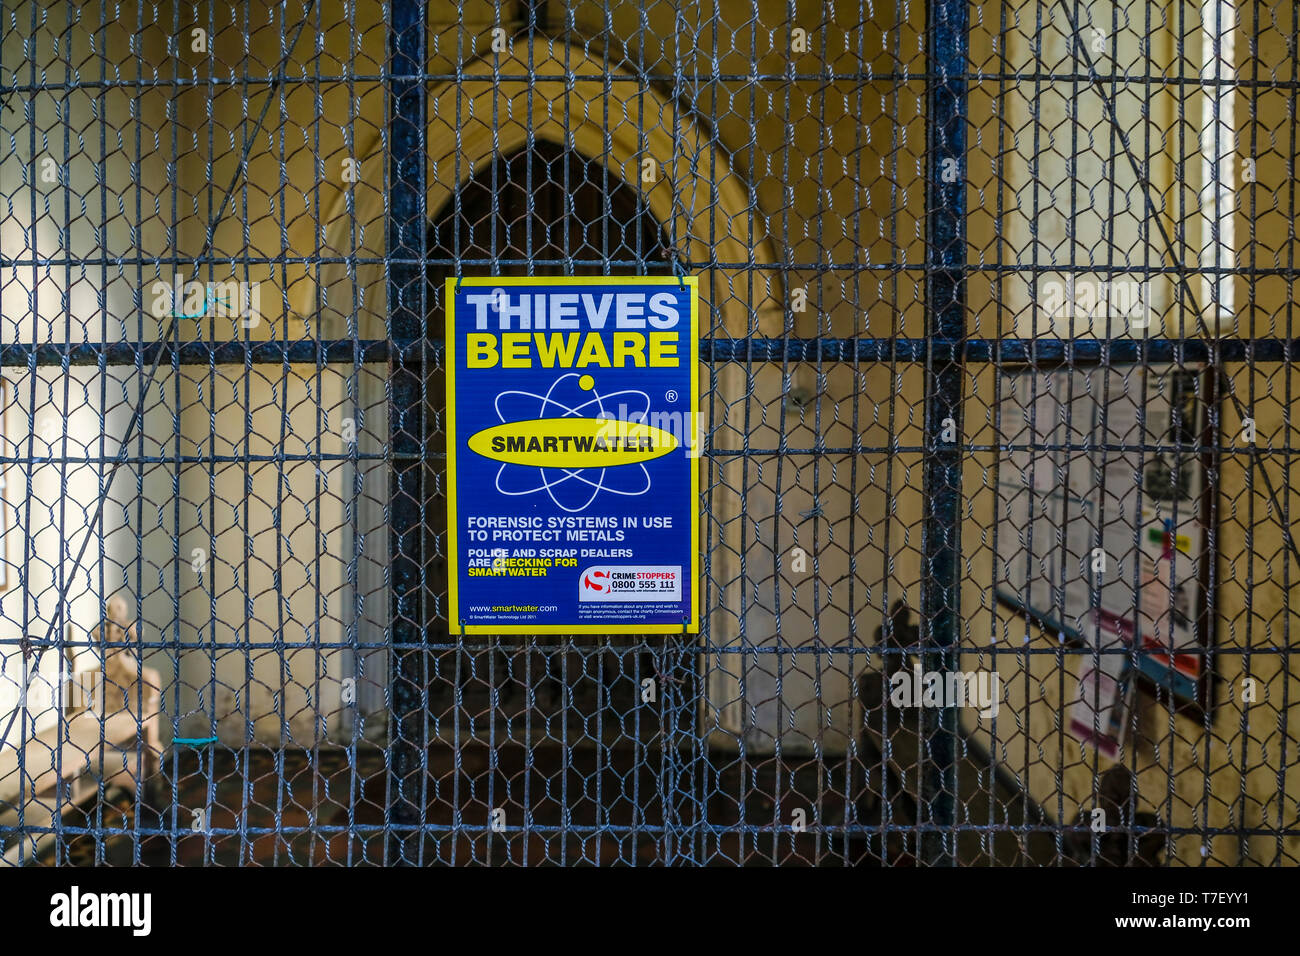 Thieves beware sign in a church porch. Stock Photo